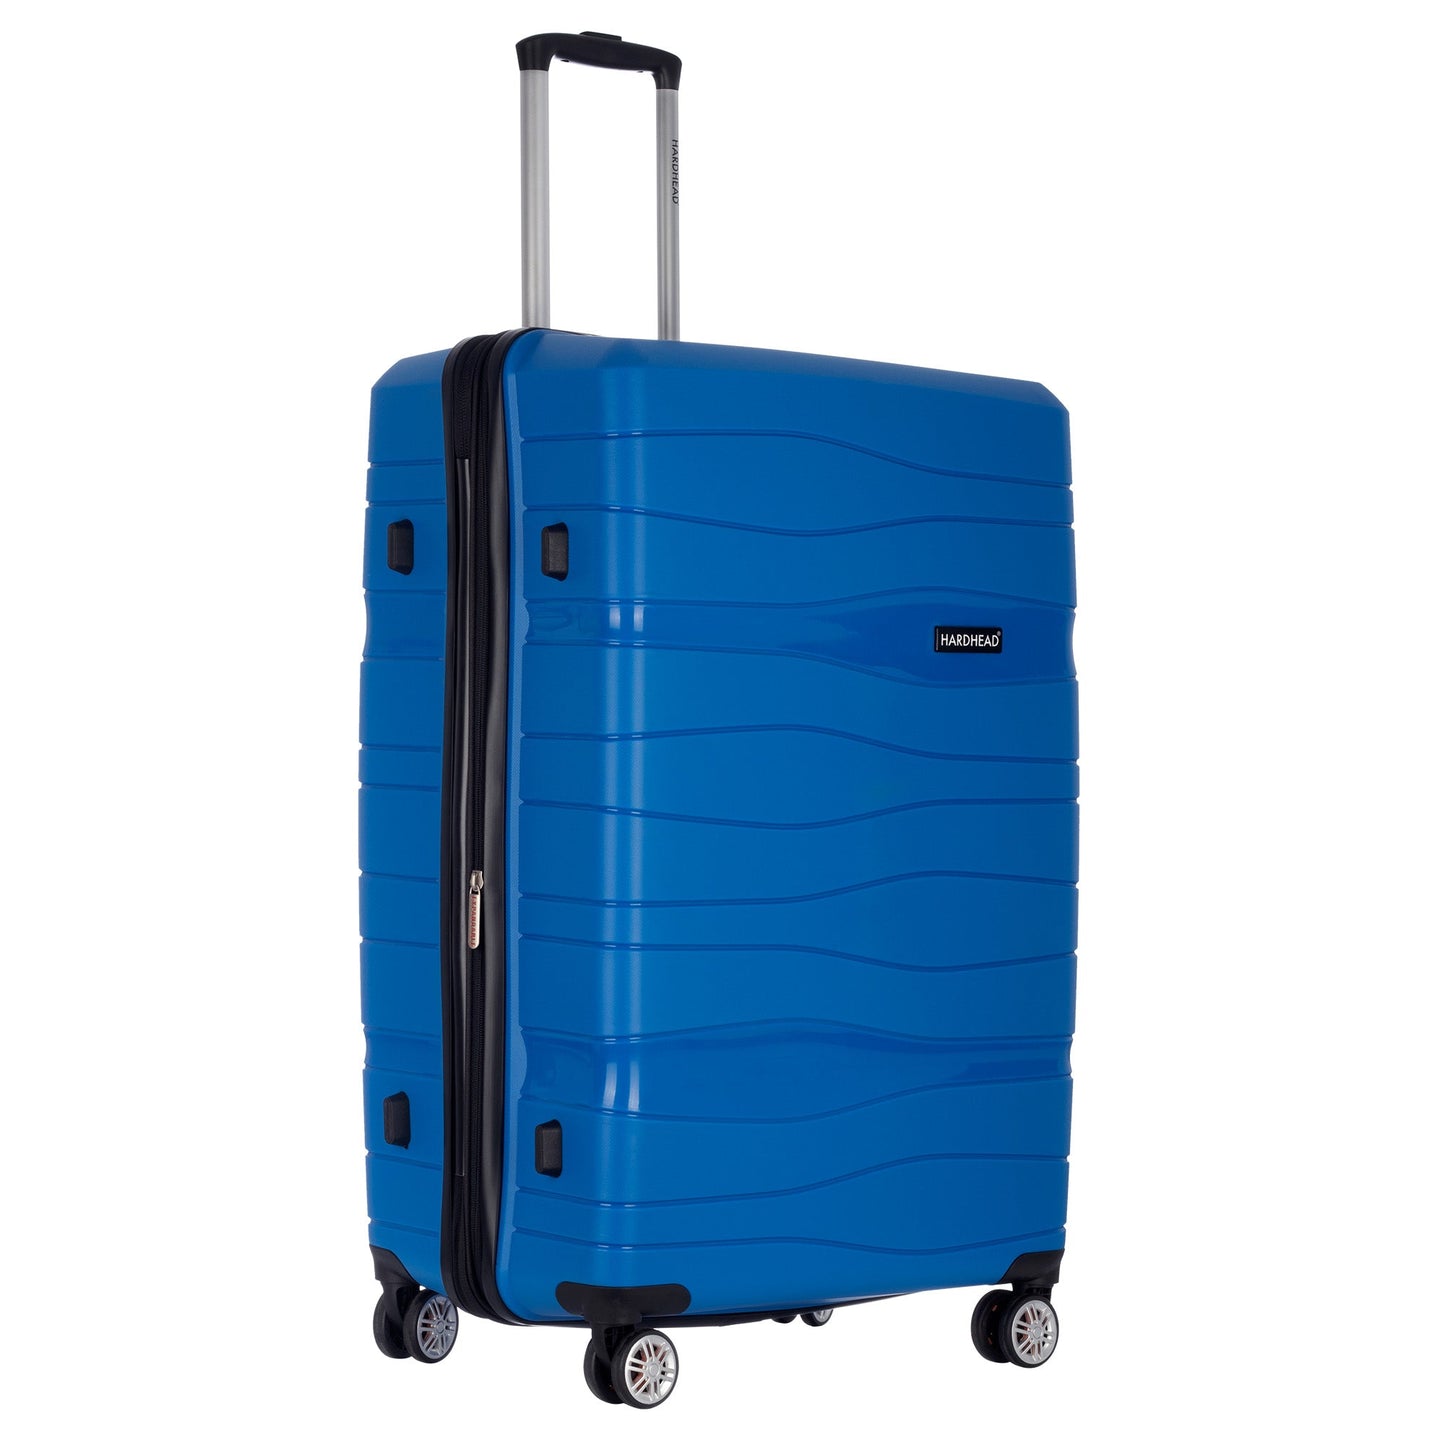 Polyprop Collection Blue Luggage (21/25/29") Suitcase Lock Spinner Hardshell